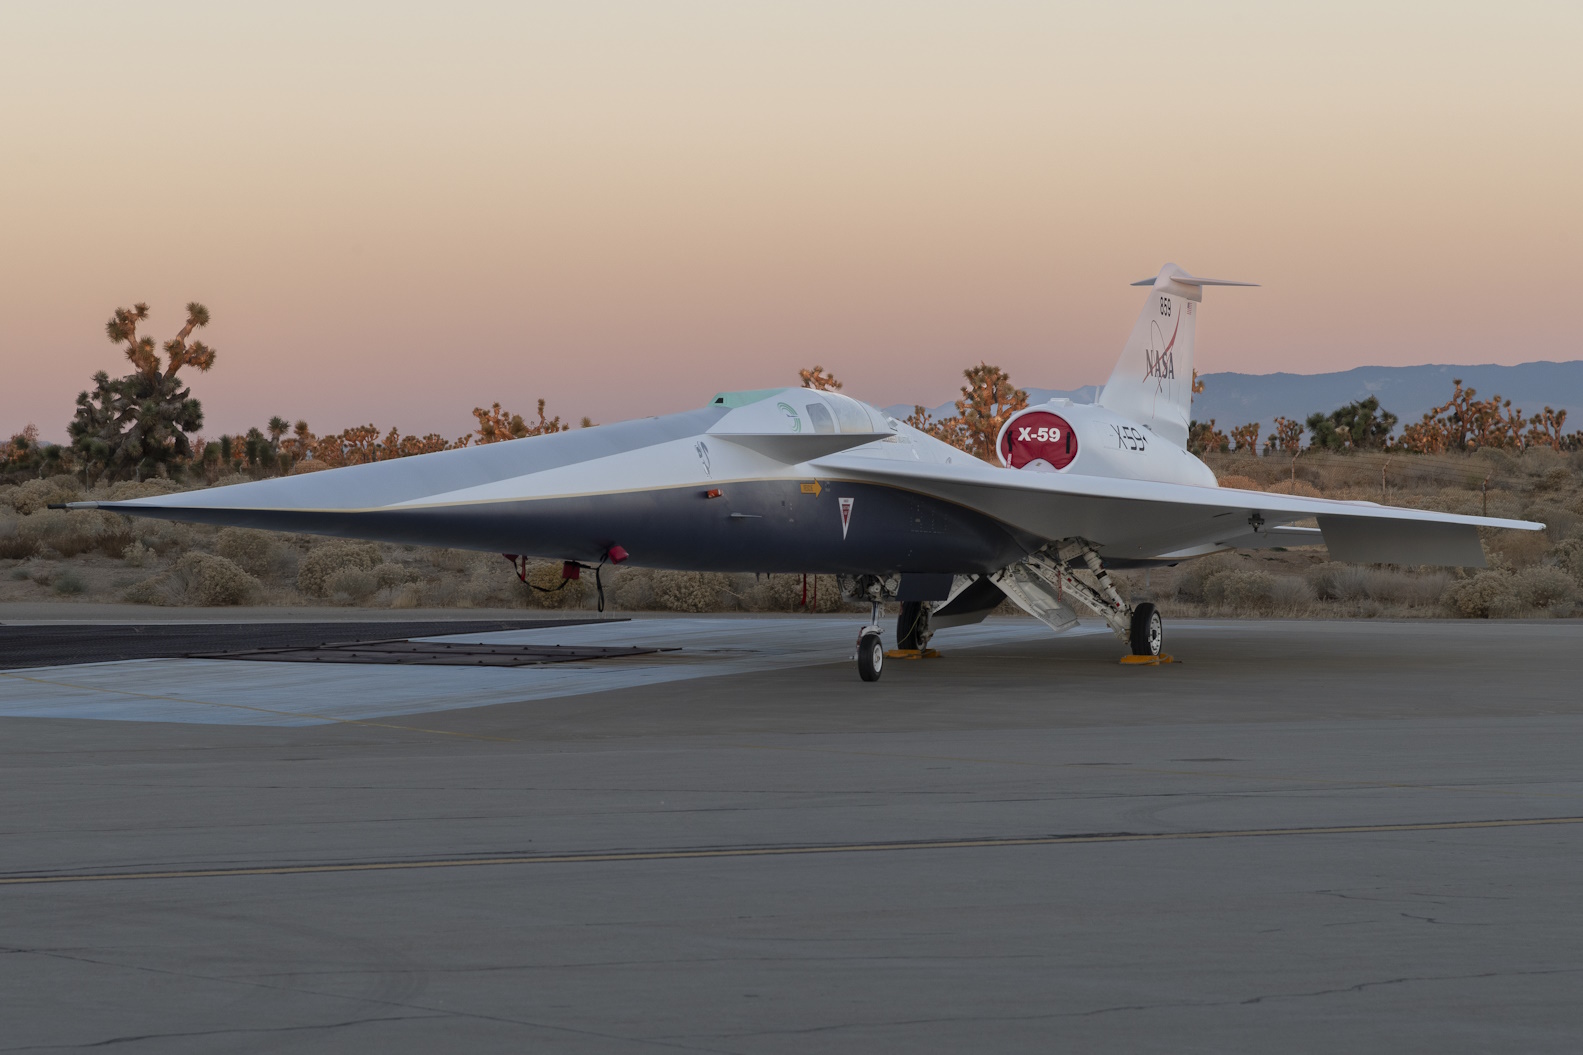 NASA’s X-59 quiet supersonic research aircraft sits on the ramp at Lockheed Martin Skunk Works in Palmdale, California, during sunrise.